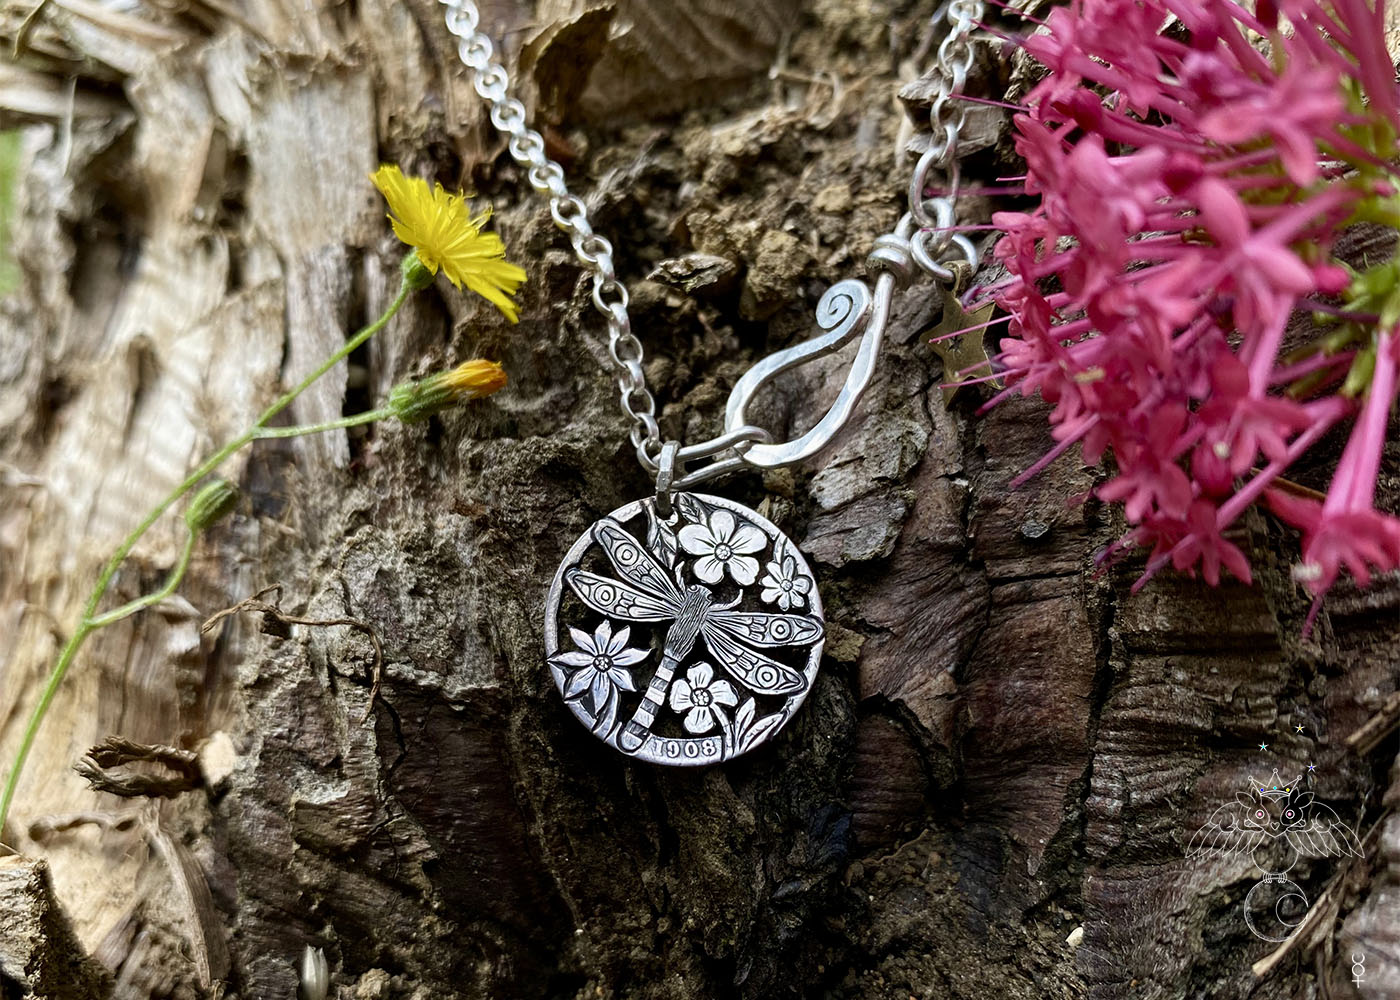 Dragonfly necklace Handmade and repurposed silver shilling The Silver sixpence collection. silver Dragonfly necklace totally handcrafted and recycled from old sterling silver sixpence coins. Designed and created by Hairy Growler Jewellery, Cambridge, UK. necklace